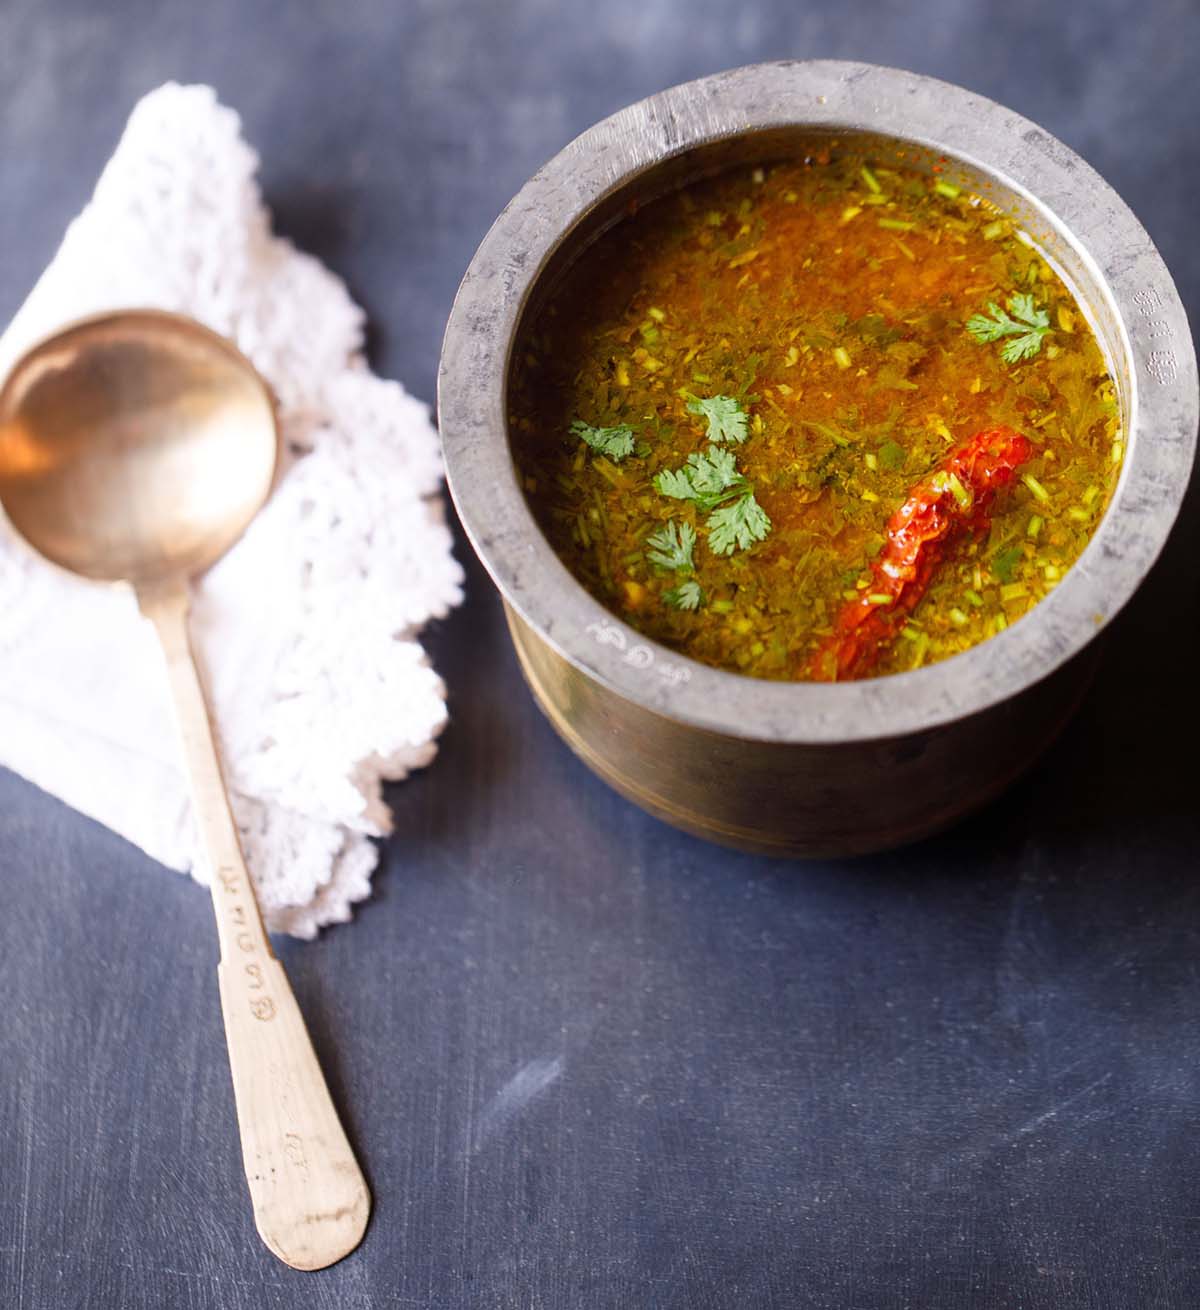 tomato rasam in a traditional South Indian container with a spoon placed on a white doily napkin next to the container on a dark blue board.